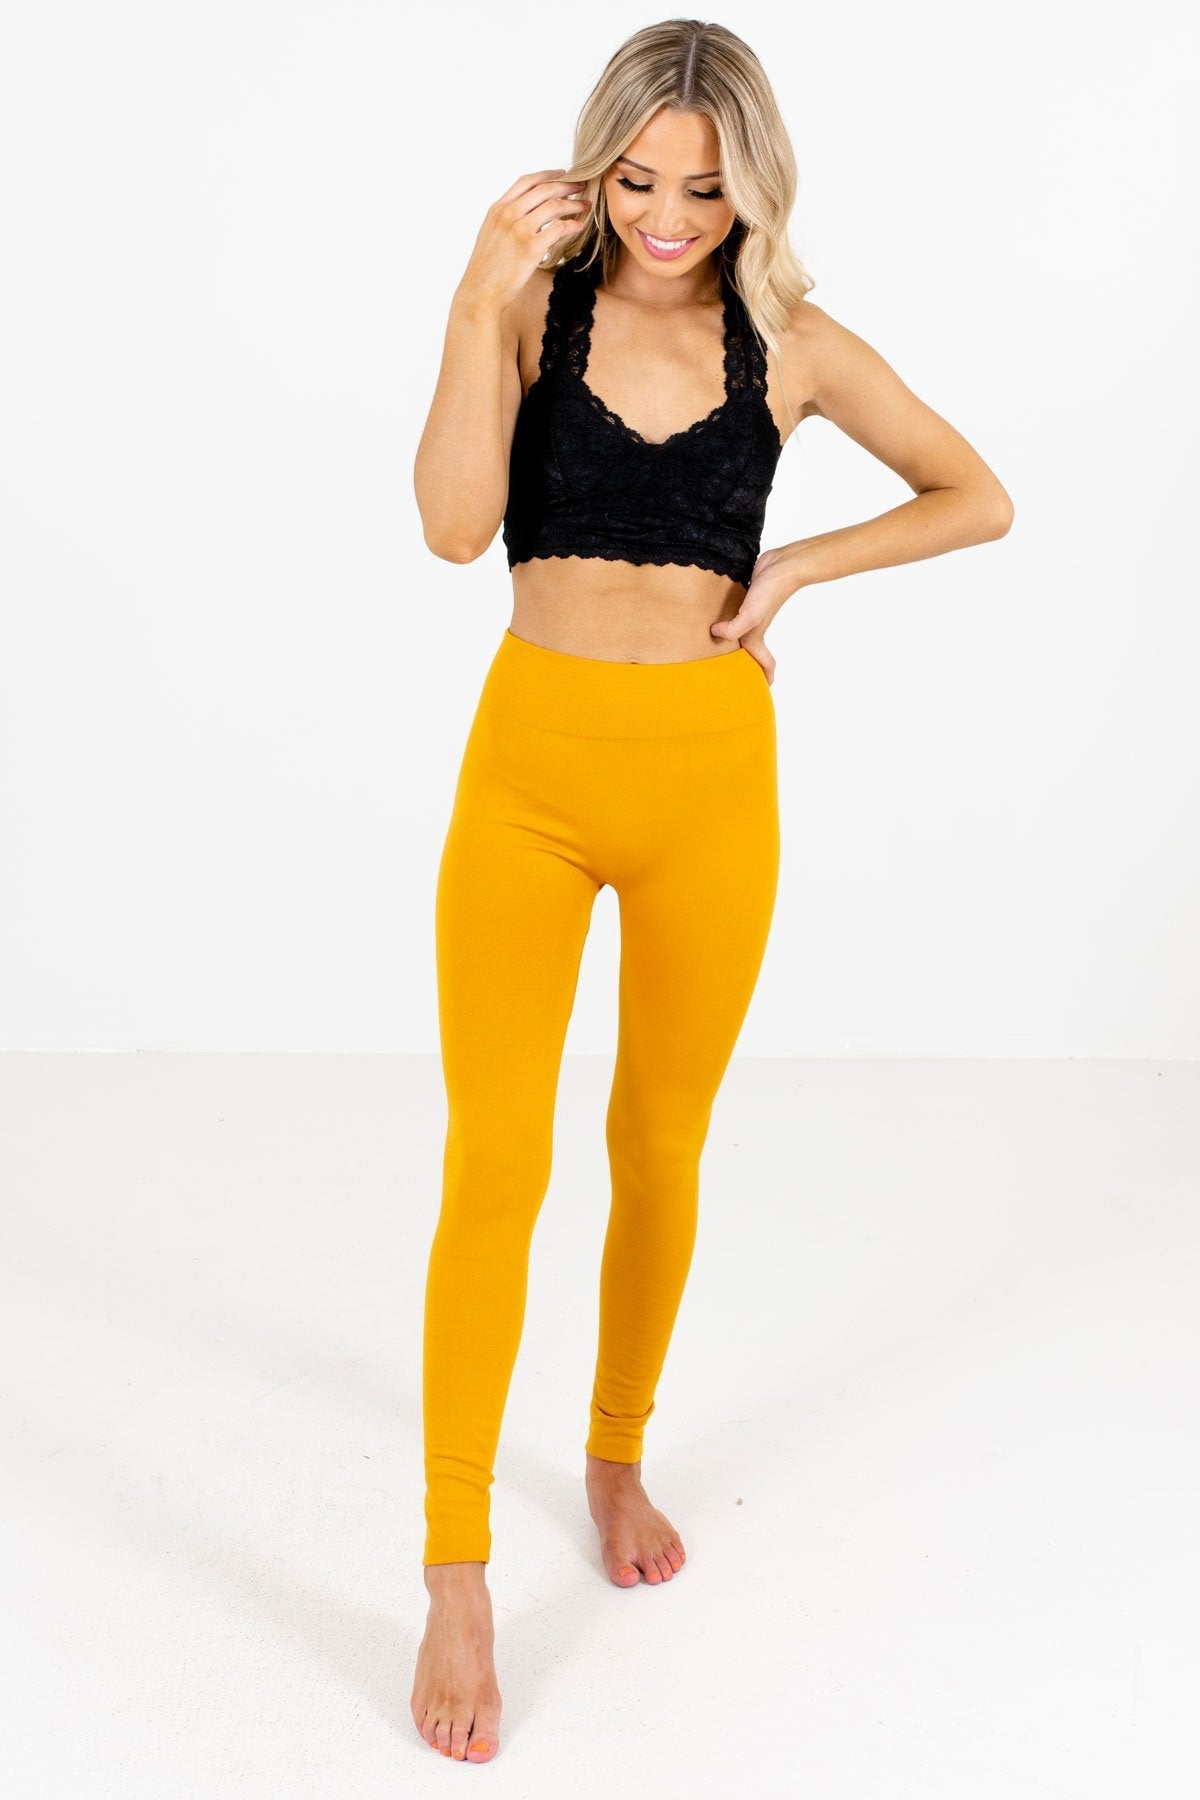 Women���s Mustard Yellow Fall and Winter Boutique Clothing